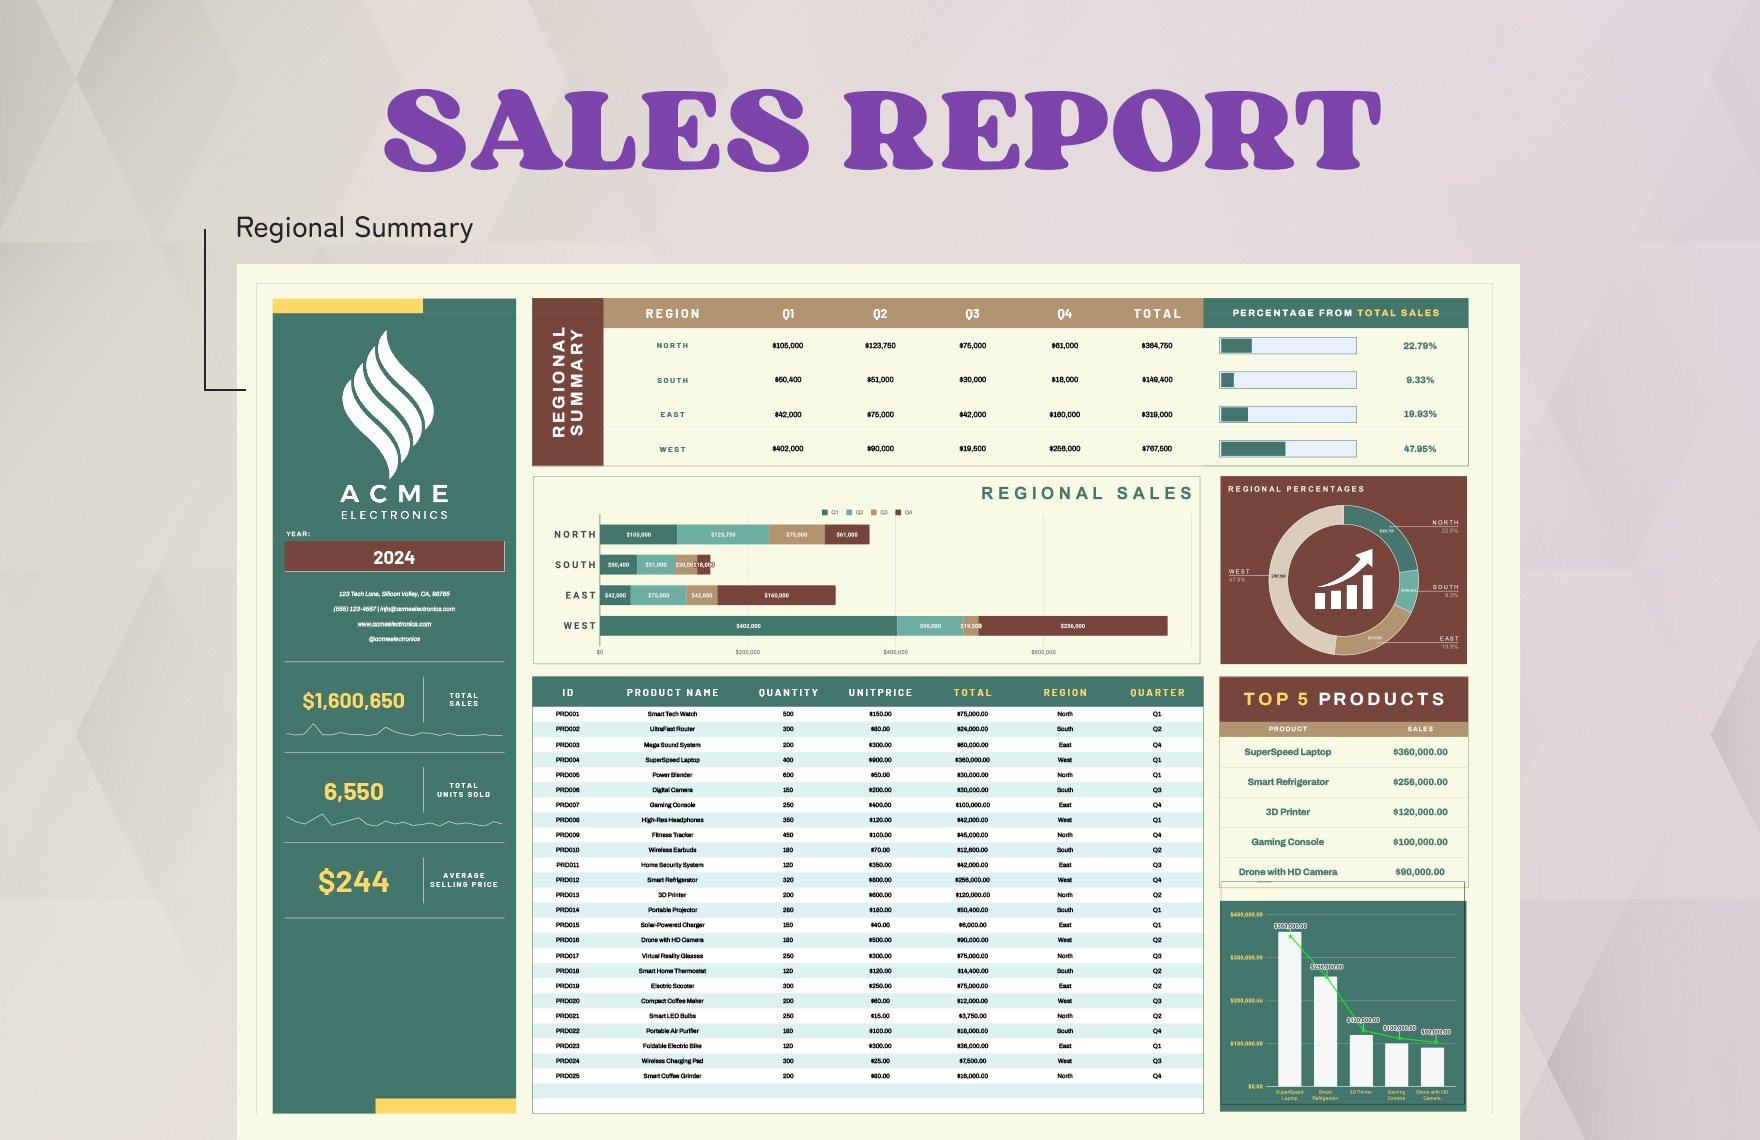 Quarterly Sales Report Template